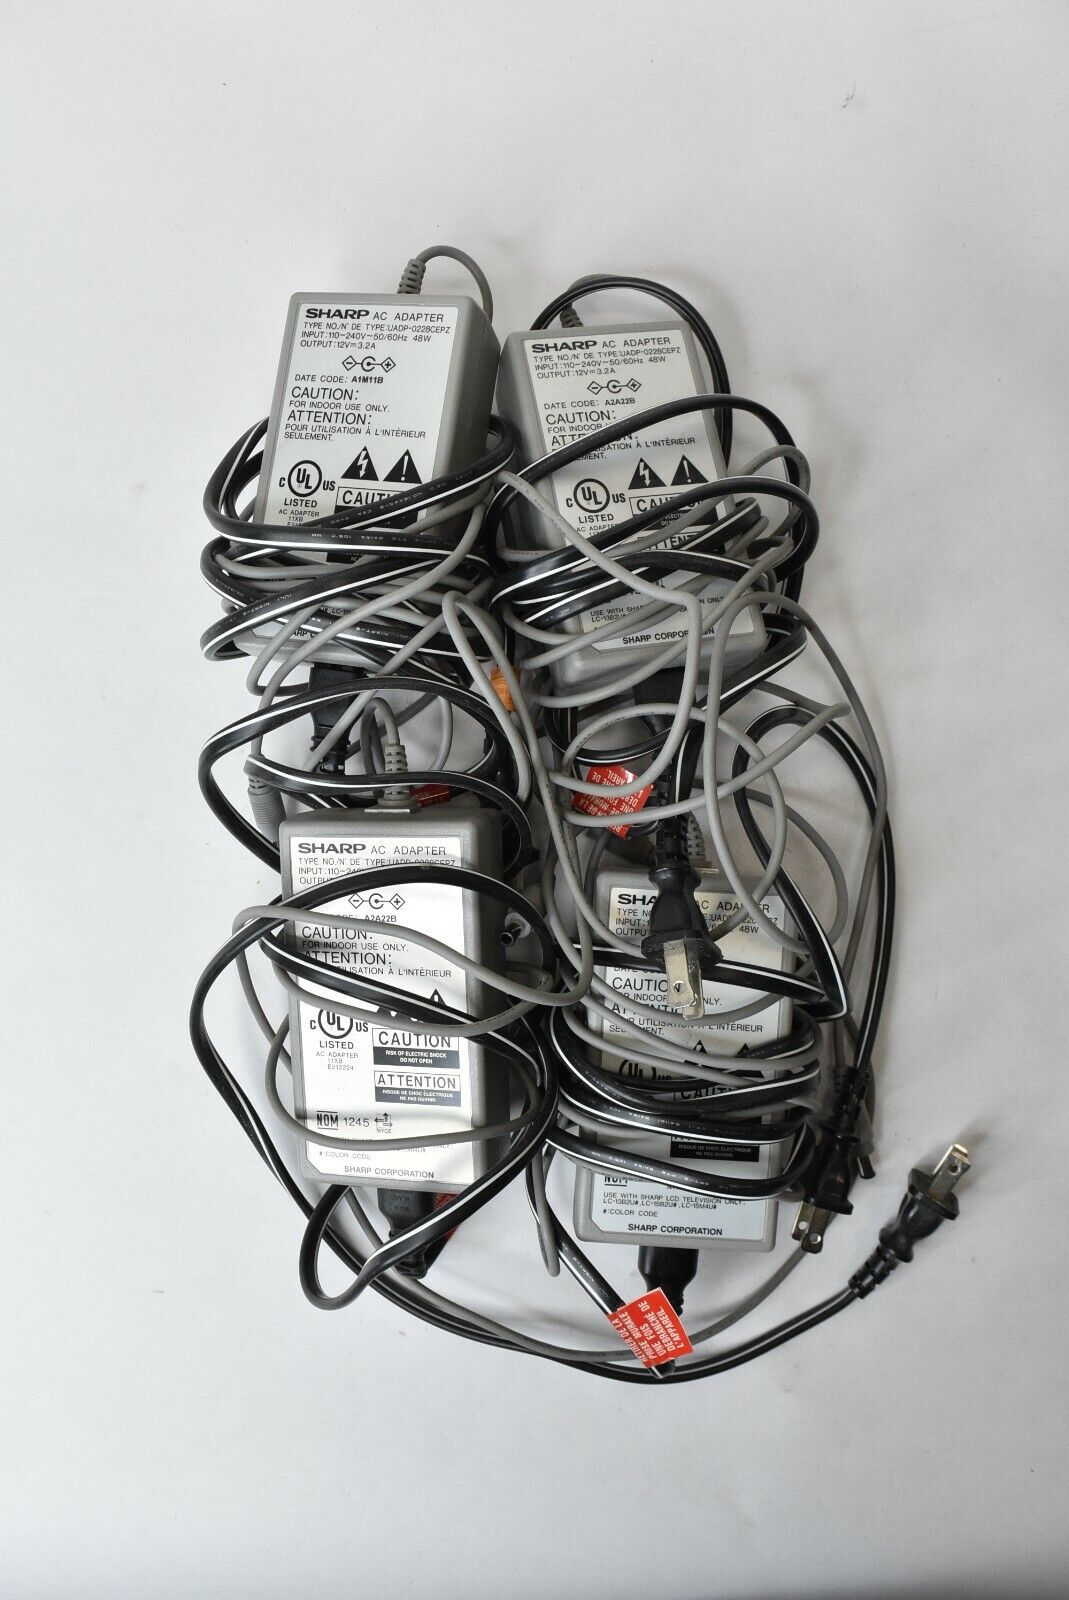 Lot of 4 Sharp AC Adapter Power Supply Unit UADP-0228CEPZ 12V 3.2A Brand: Sharp Connection Split/Duplication: 1:2 Fe